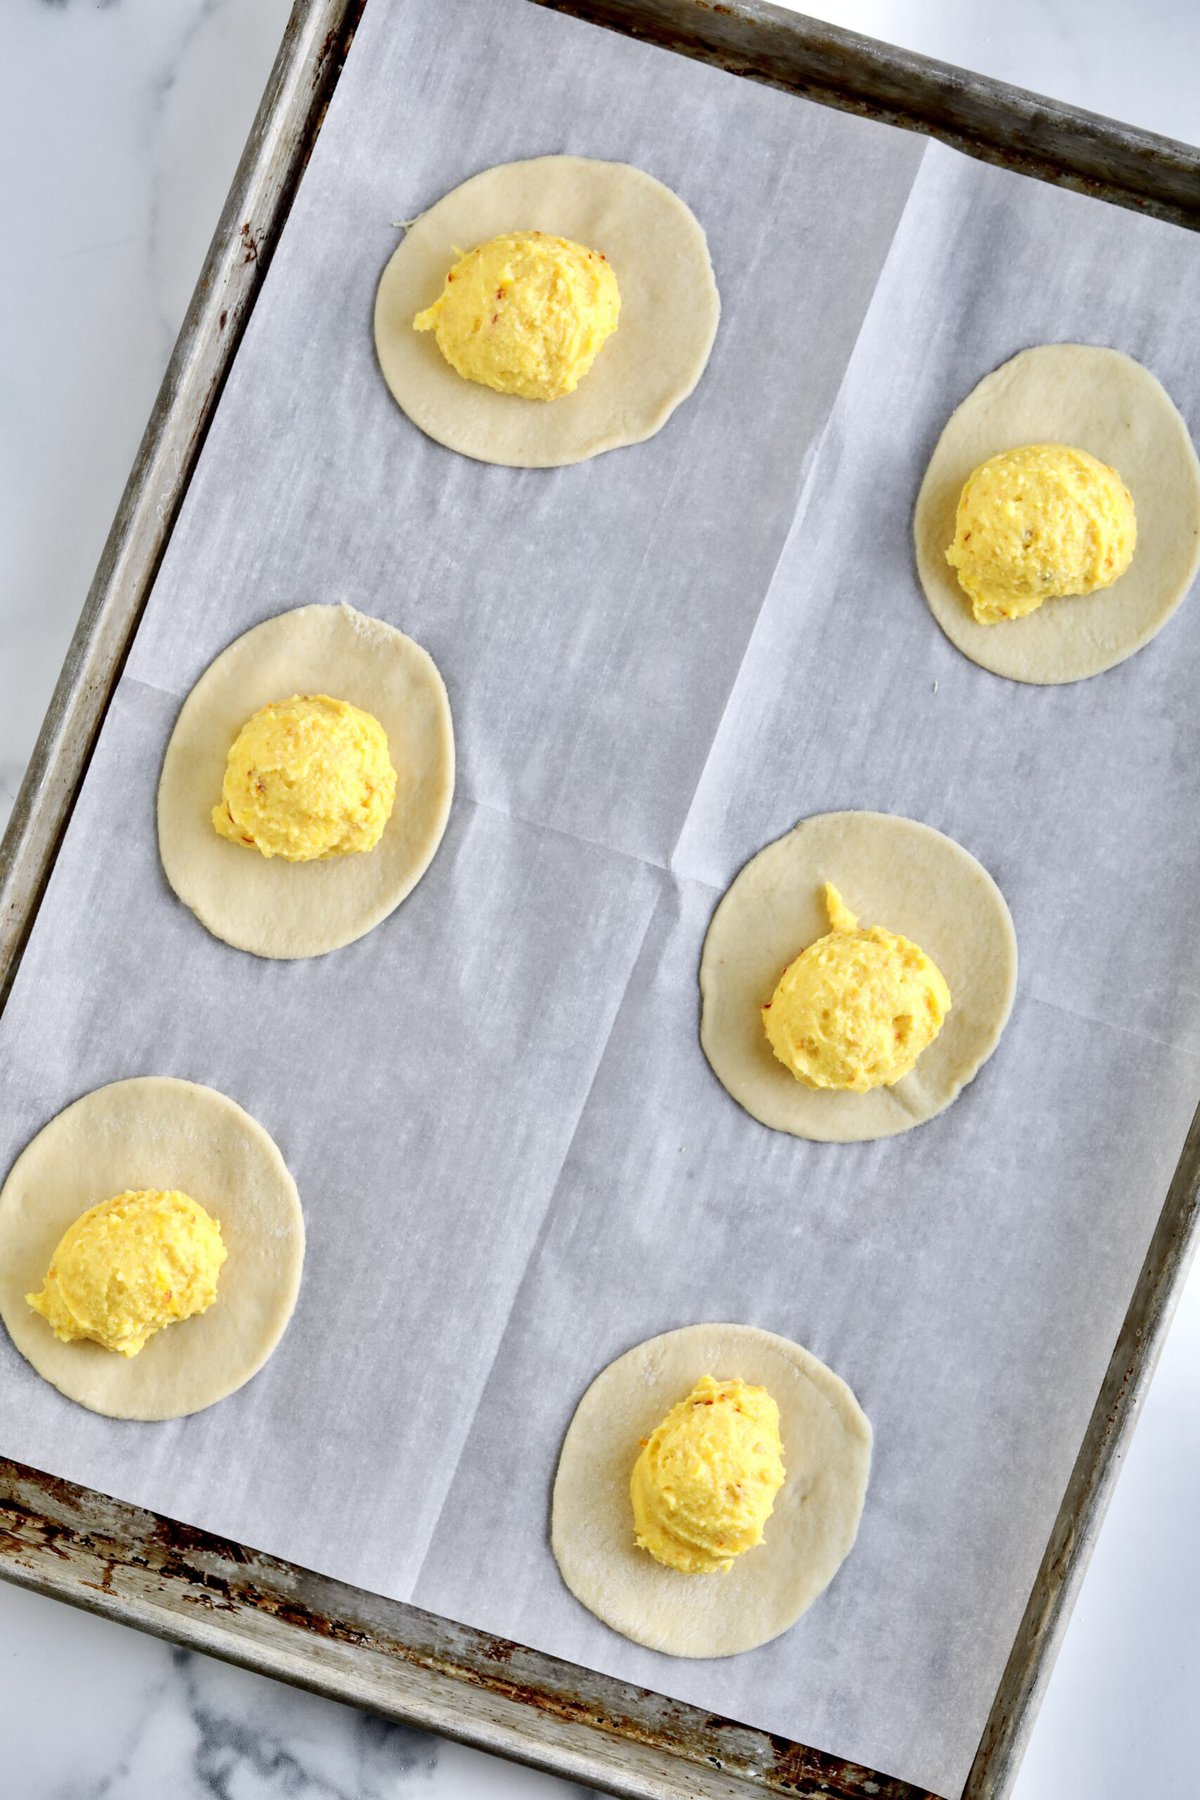 How to make Sardinian Pardulas Recipe- place pastry dough circles on a cookie sheet and fill with the ricotta filling.